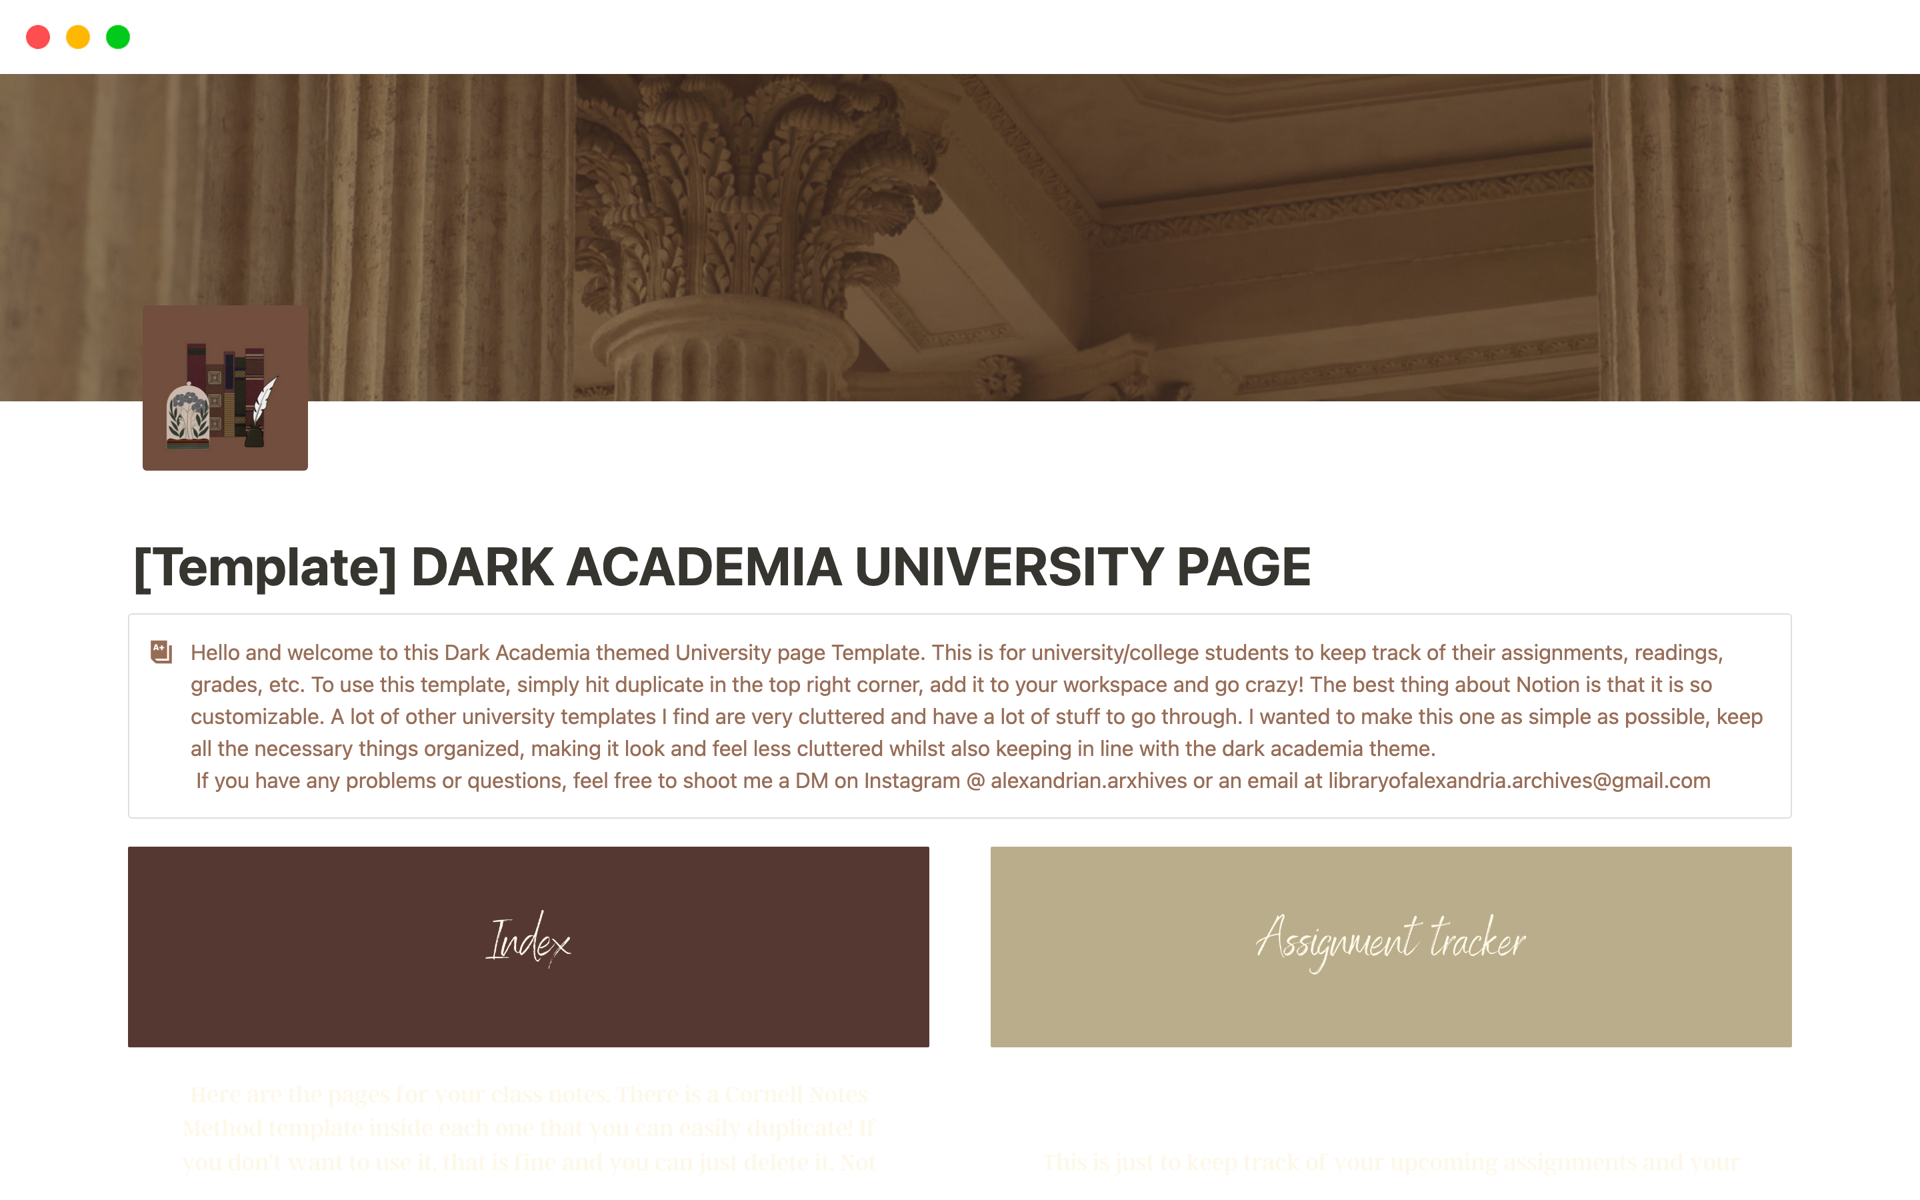 Best template to keep track of university assignments to get the best grades!